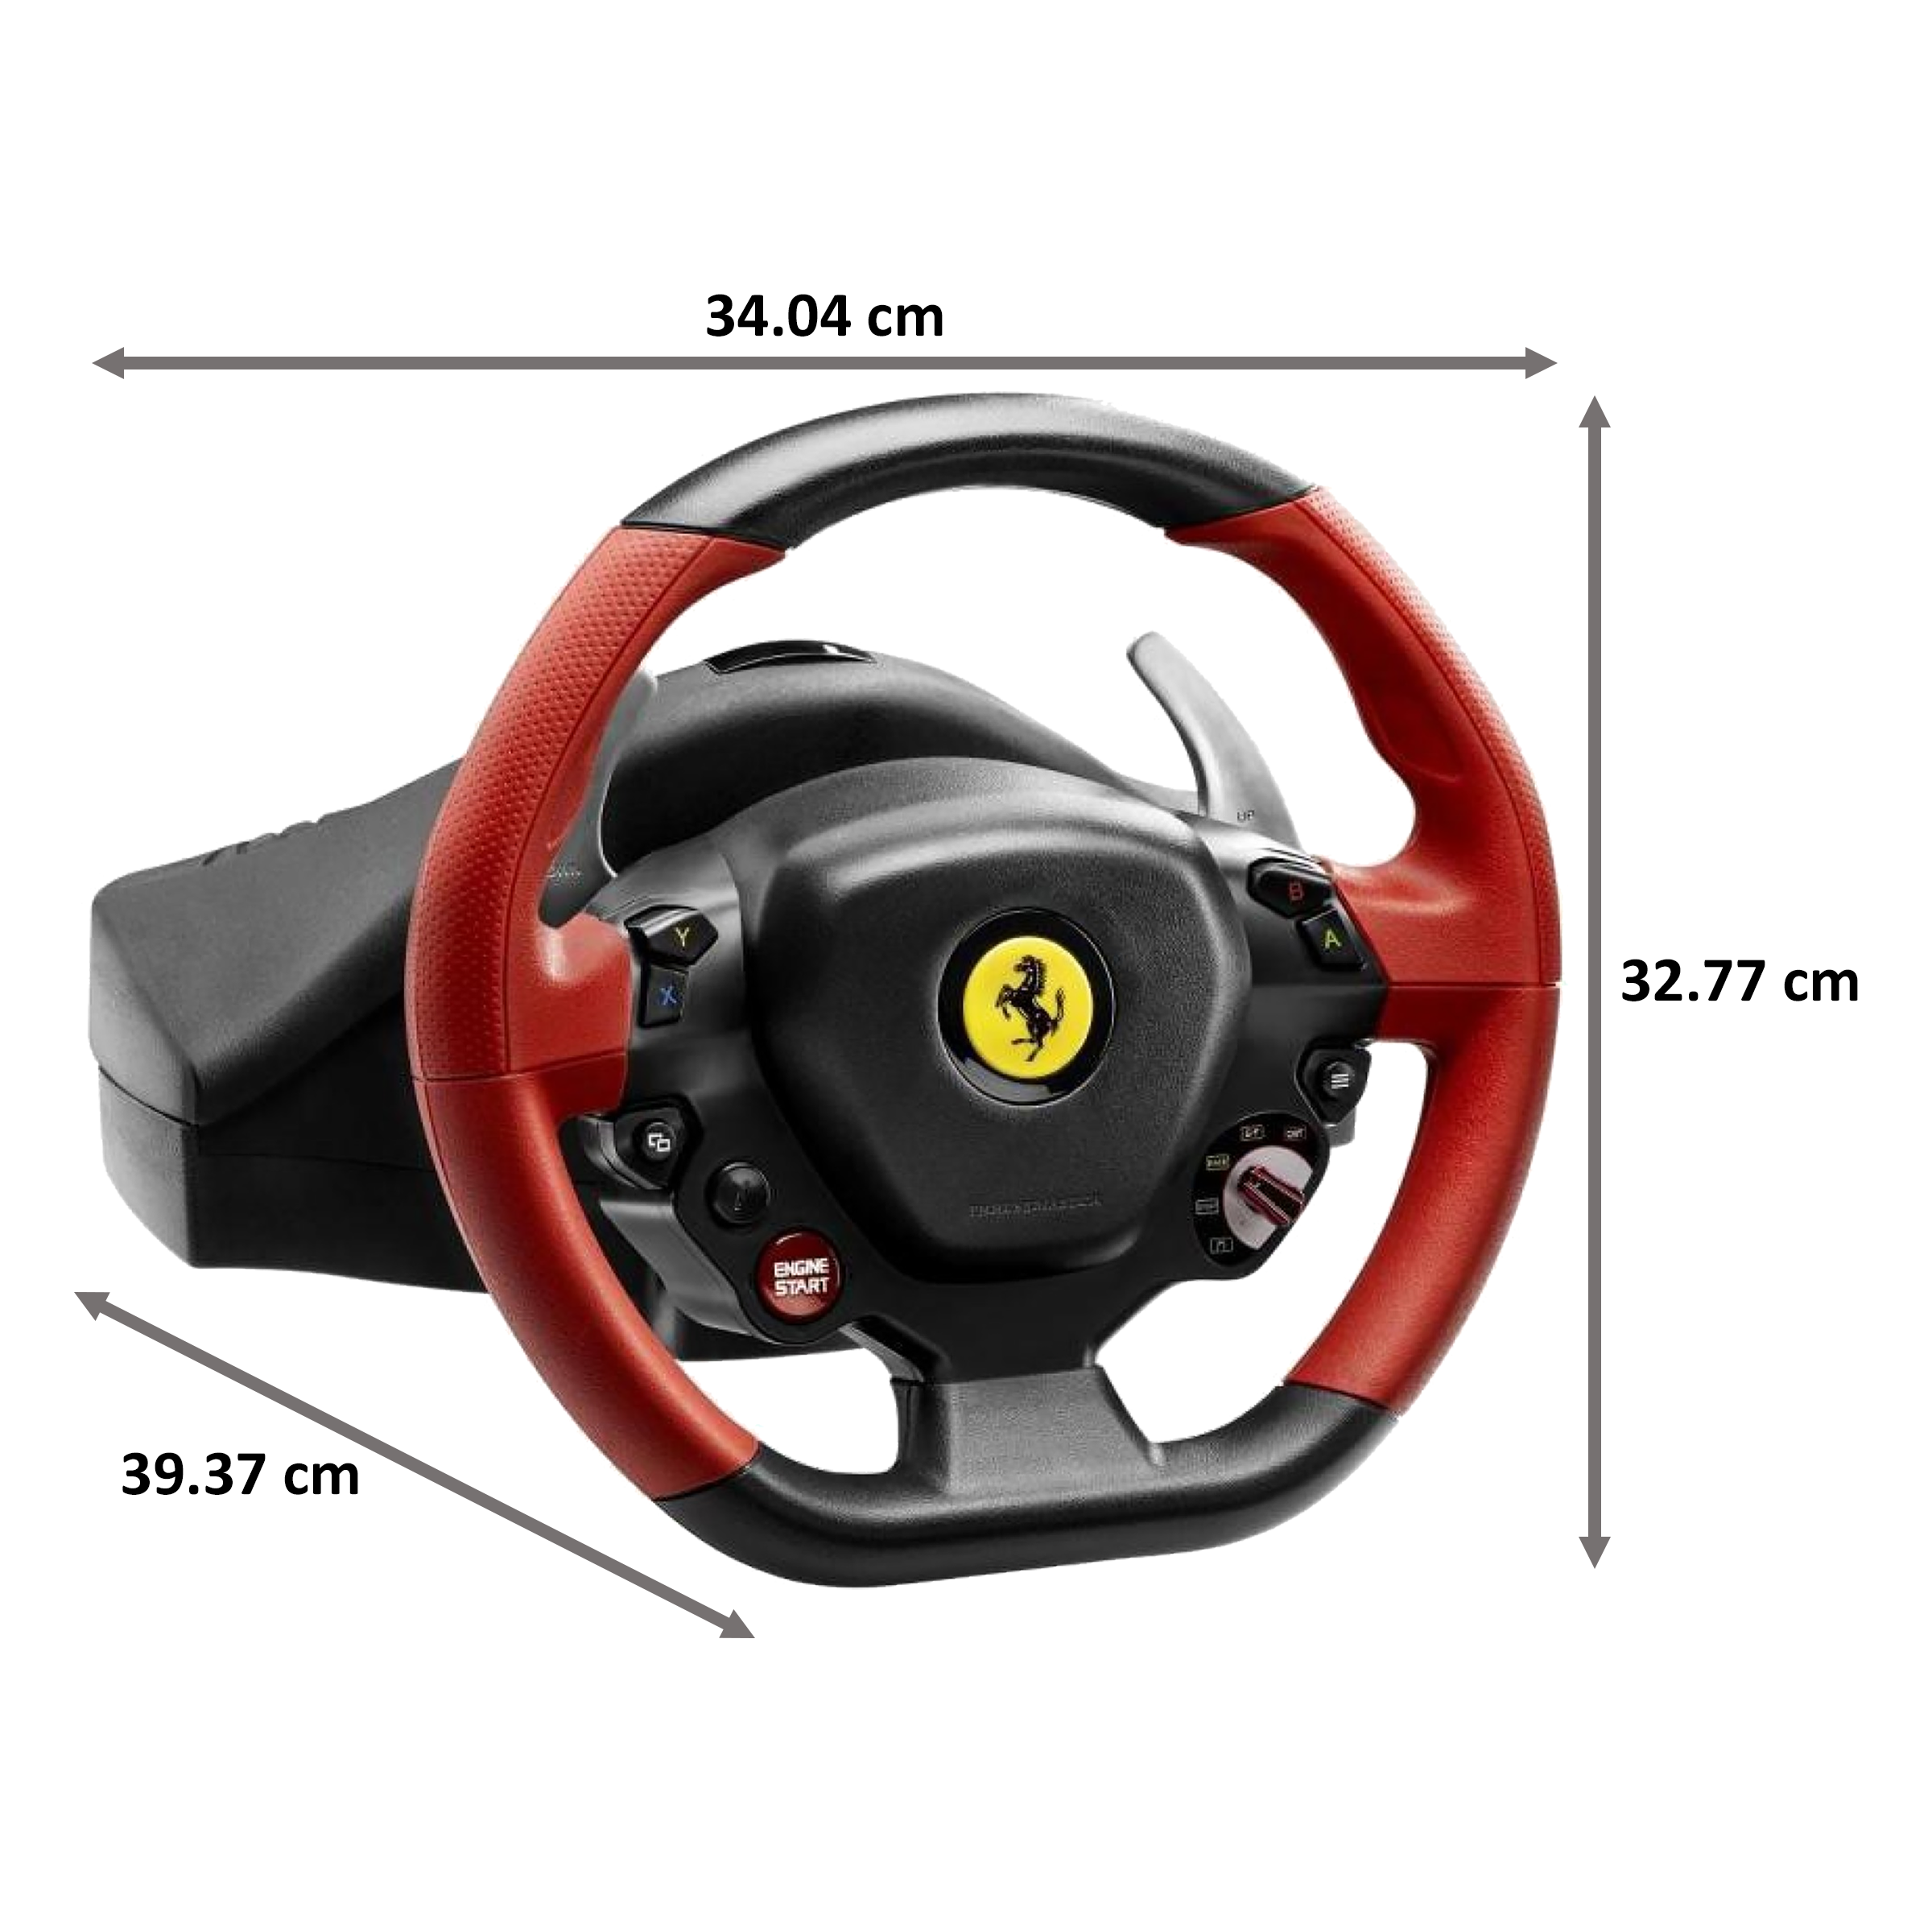 Thrustmaster Ferrari 458 Spider Racing Wheel For Xbox One (Bungee Cord Mechanism, Red/Black)_2